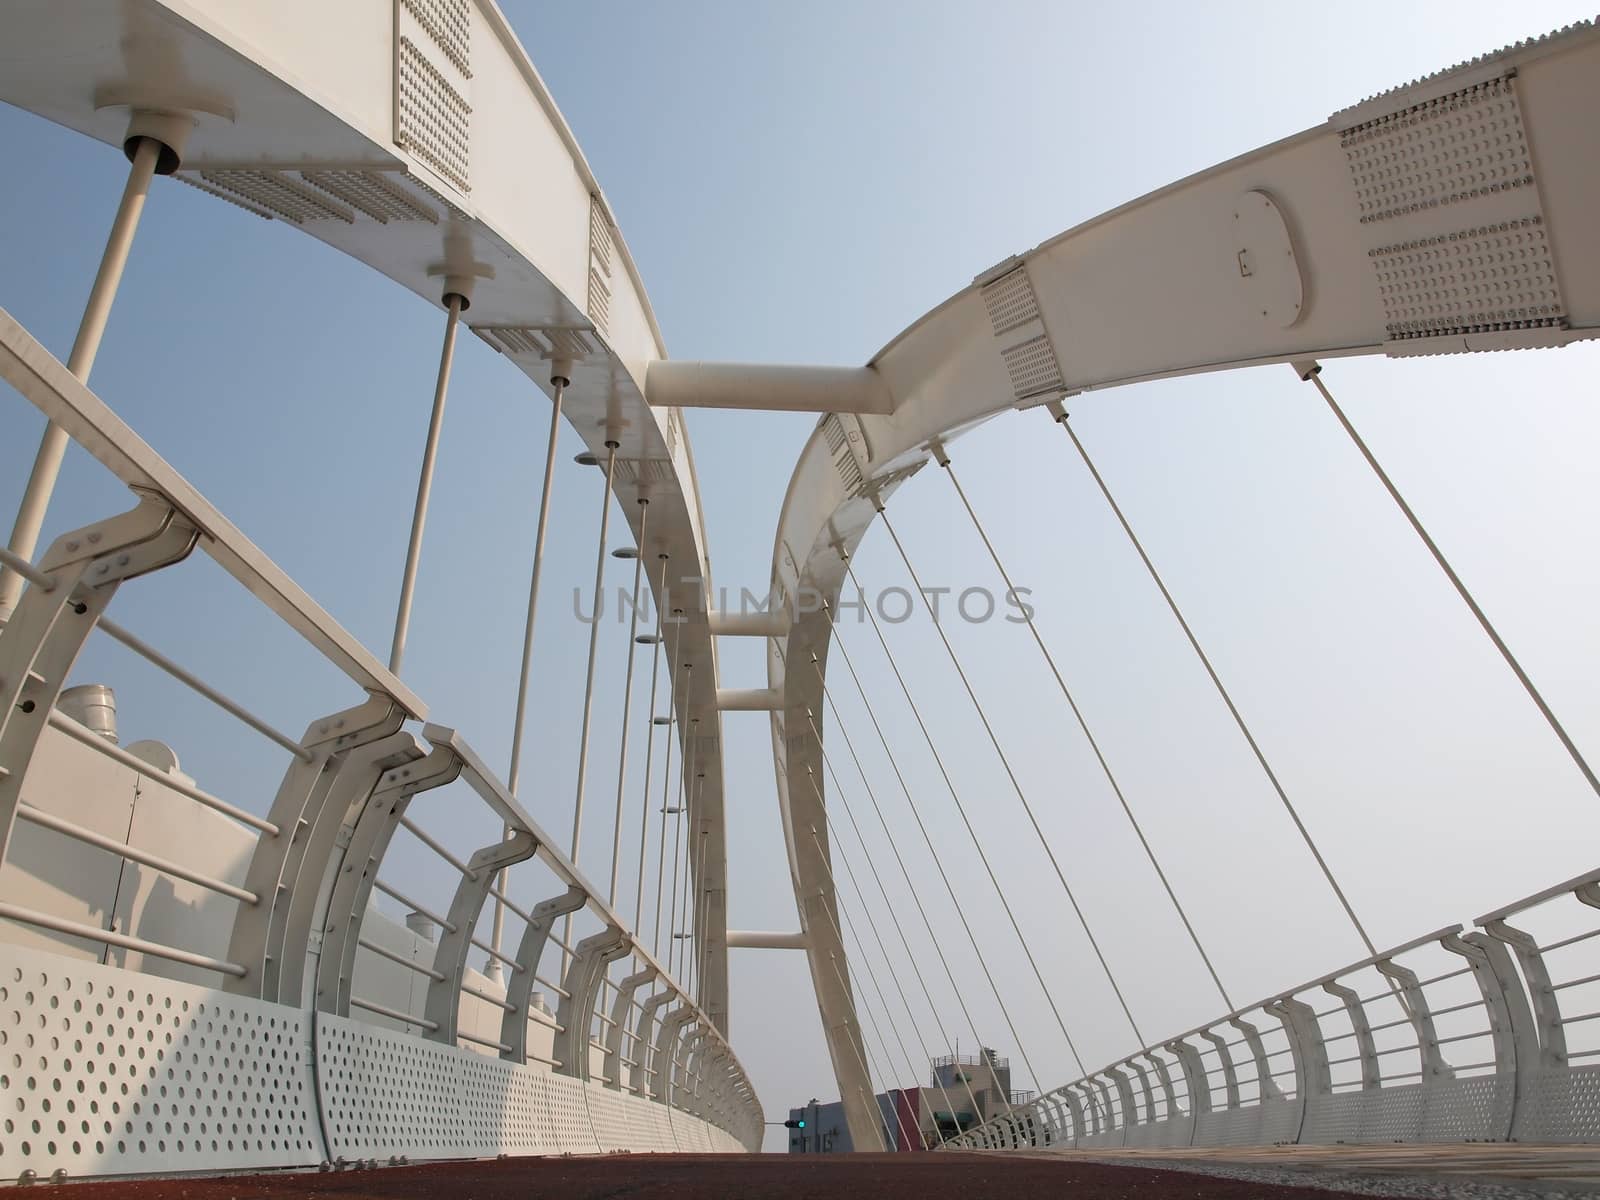 A modern arch bridge for cyclists and pedestrians